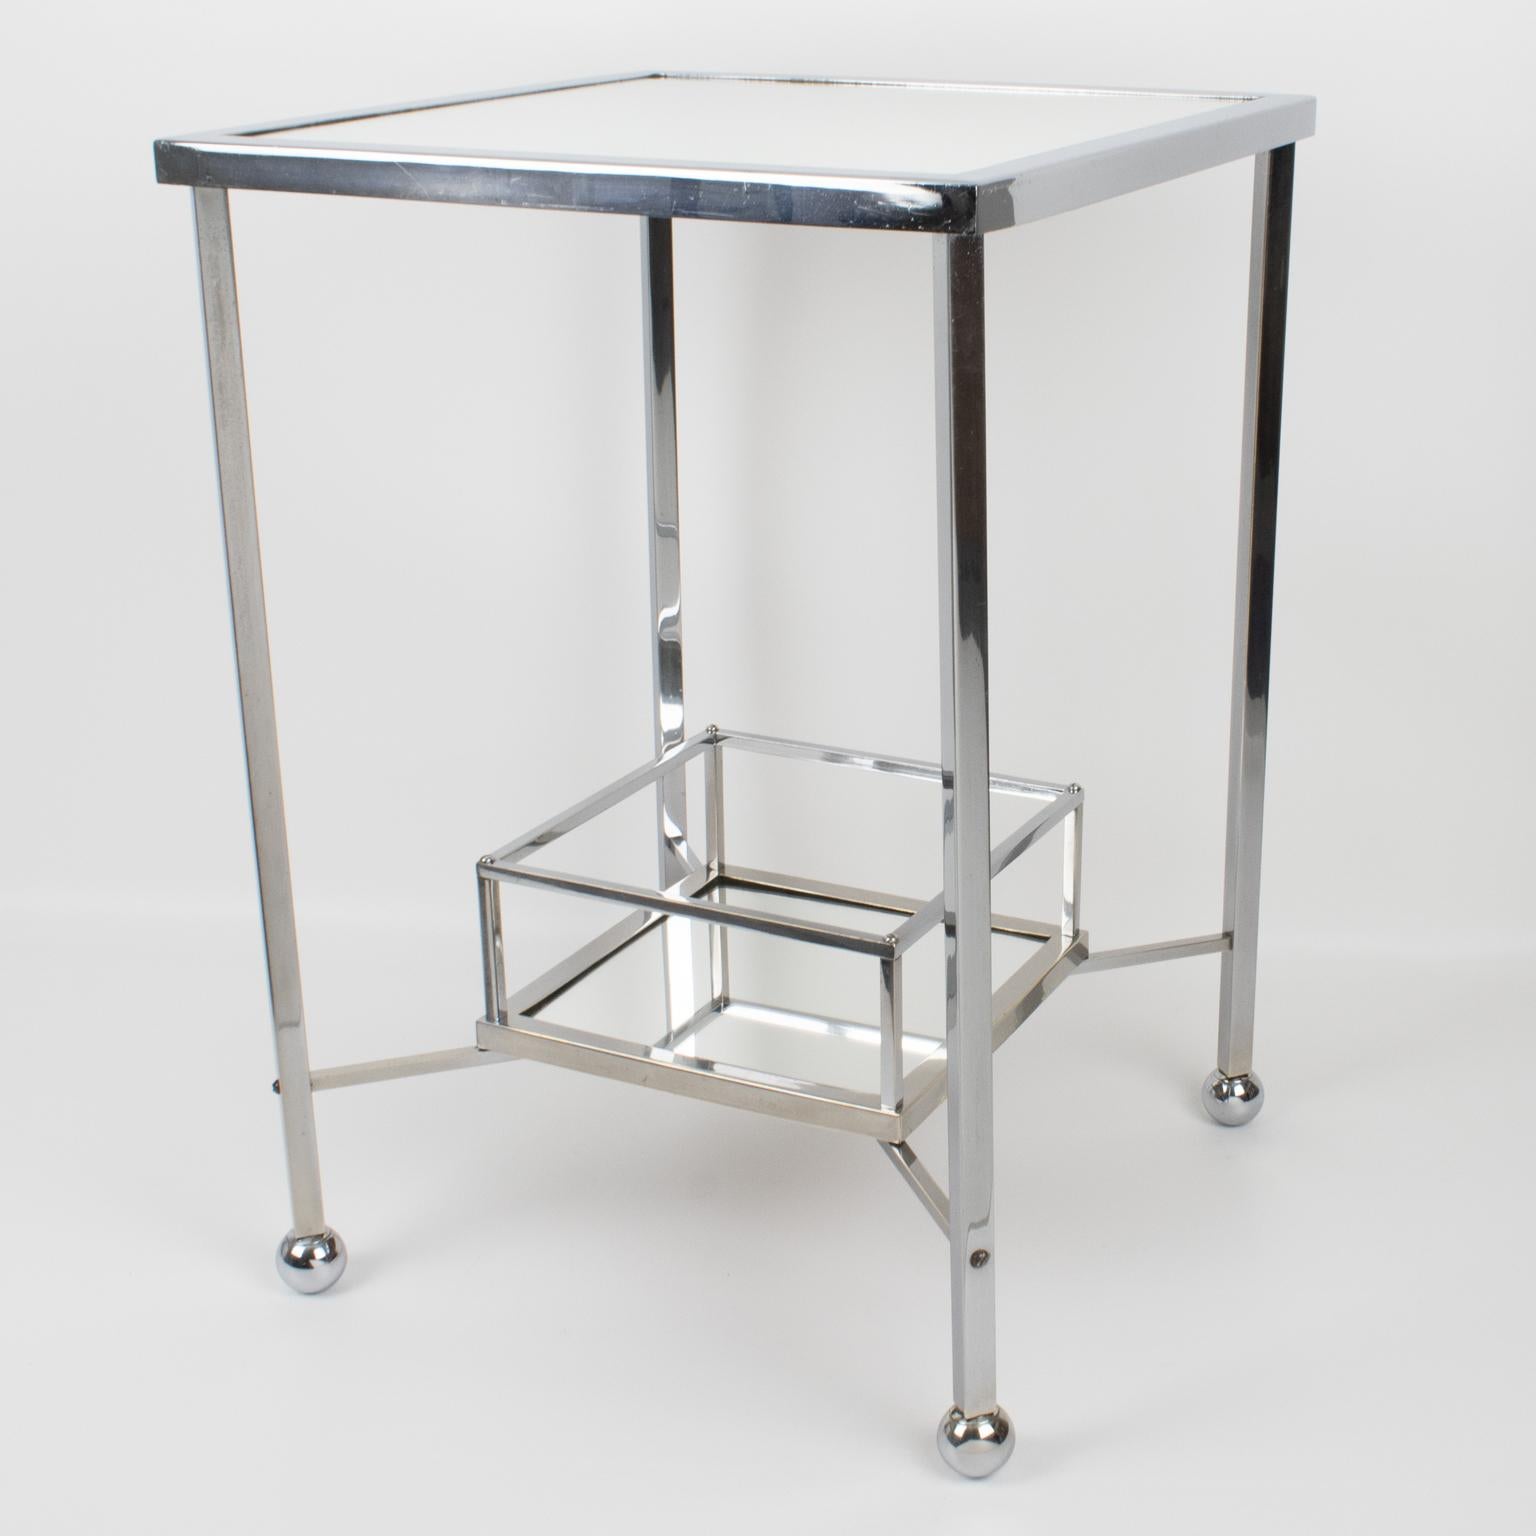 Jacques Adnet (1901 - 1984) designed this stunning Art Deco occasional bar or side table in the 1930s. The minimalist chic design boasts a square shape with a mirrored glass tabletop and a bottle tray on the bottom. The table is made of chromed